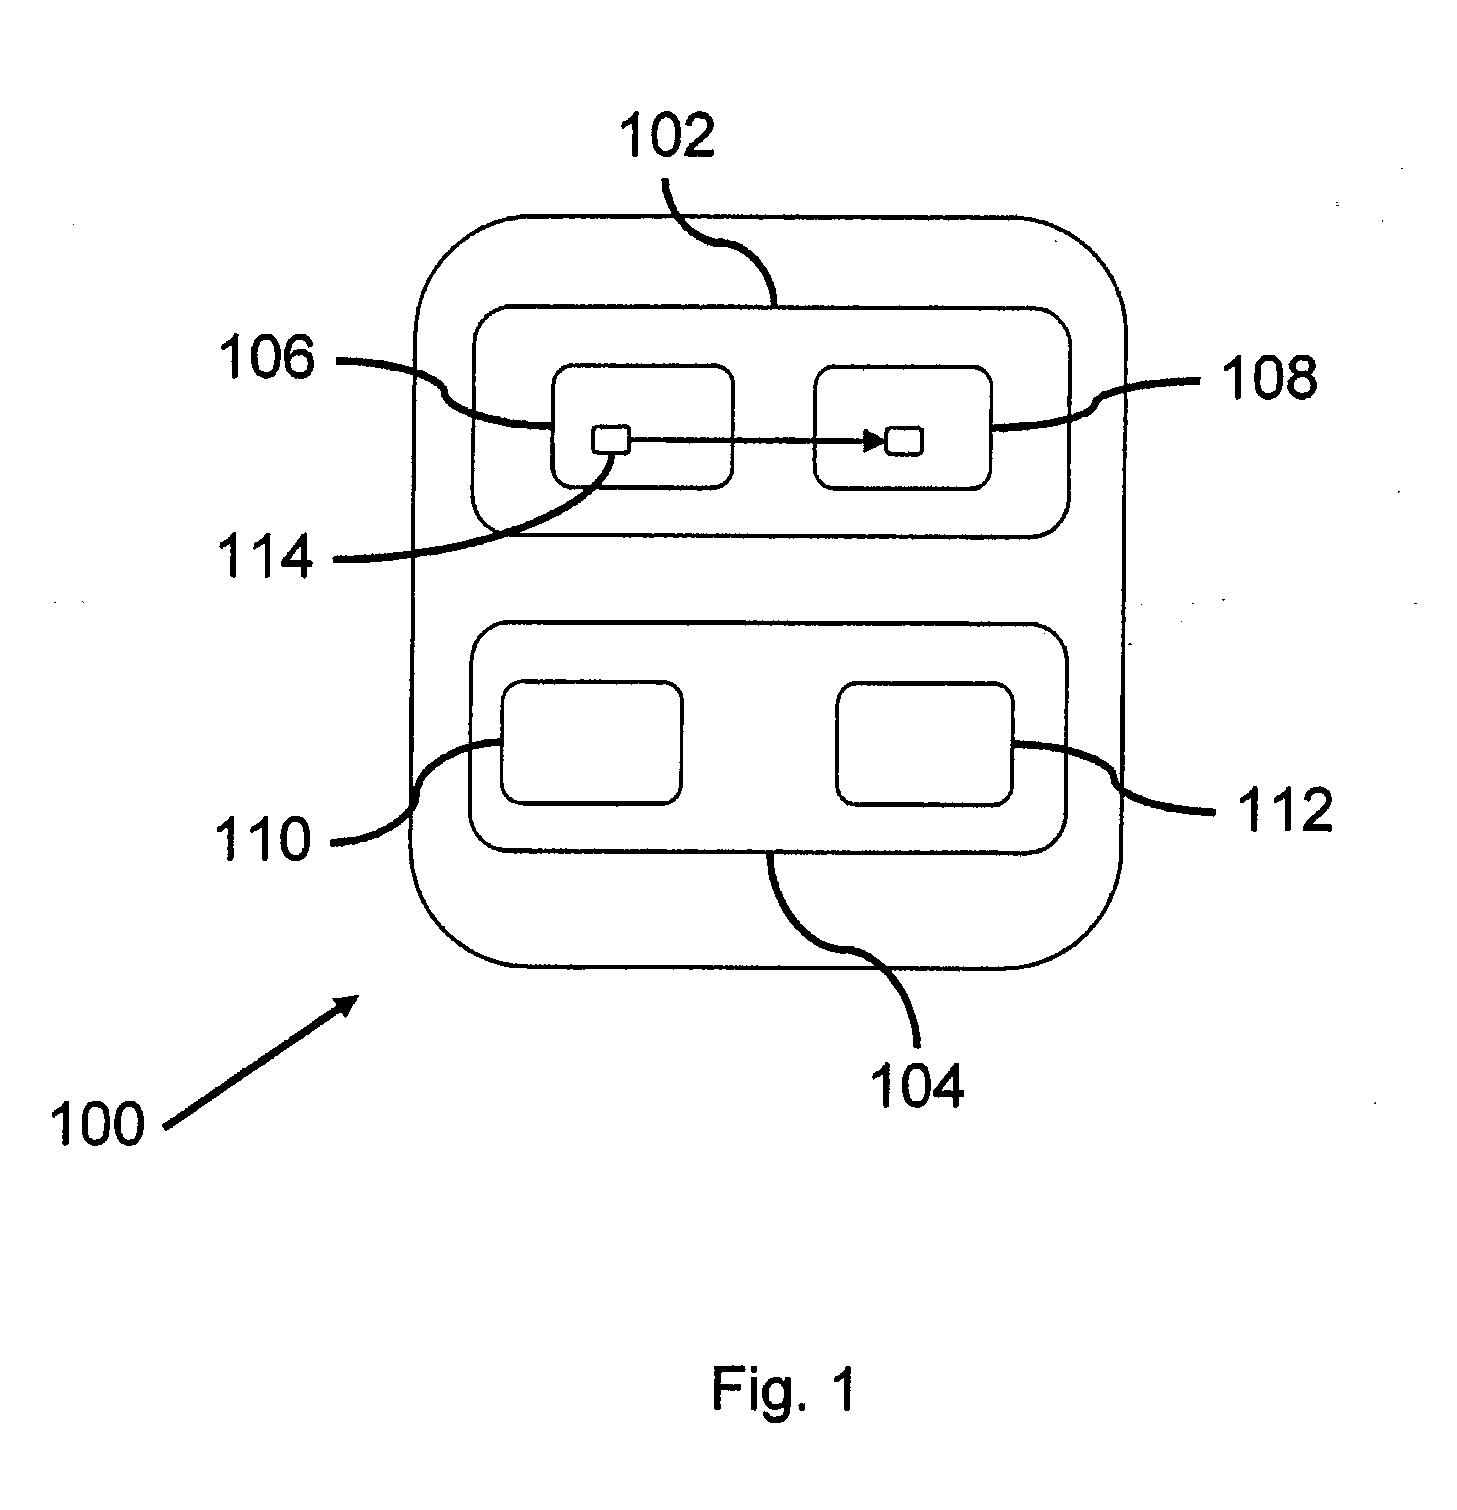 Method for limiting the use of a mobile communications device